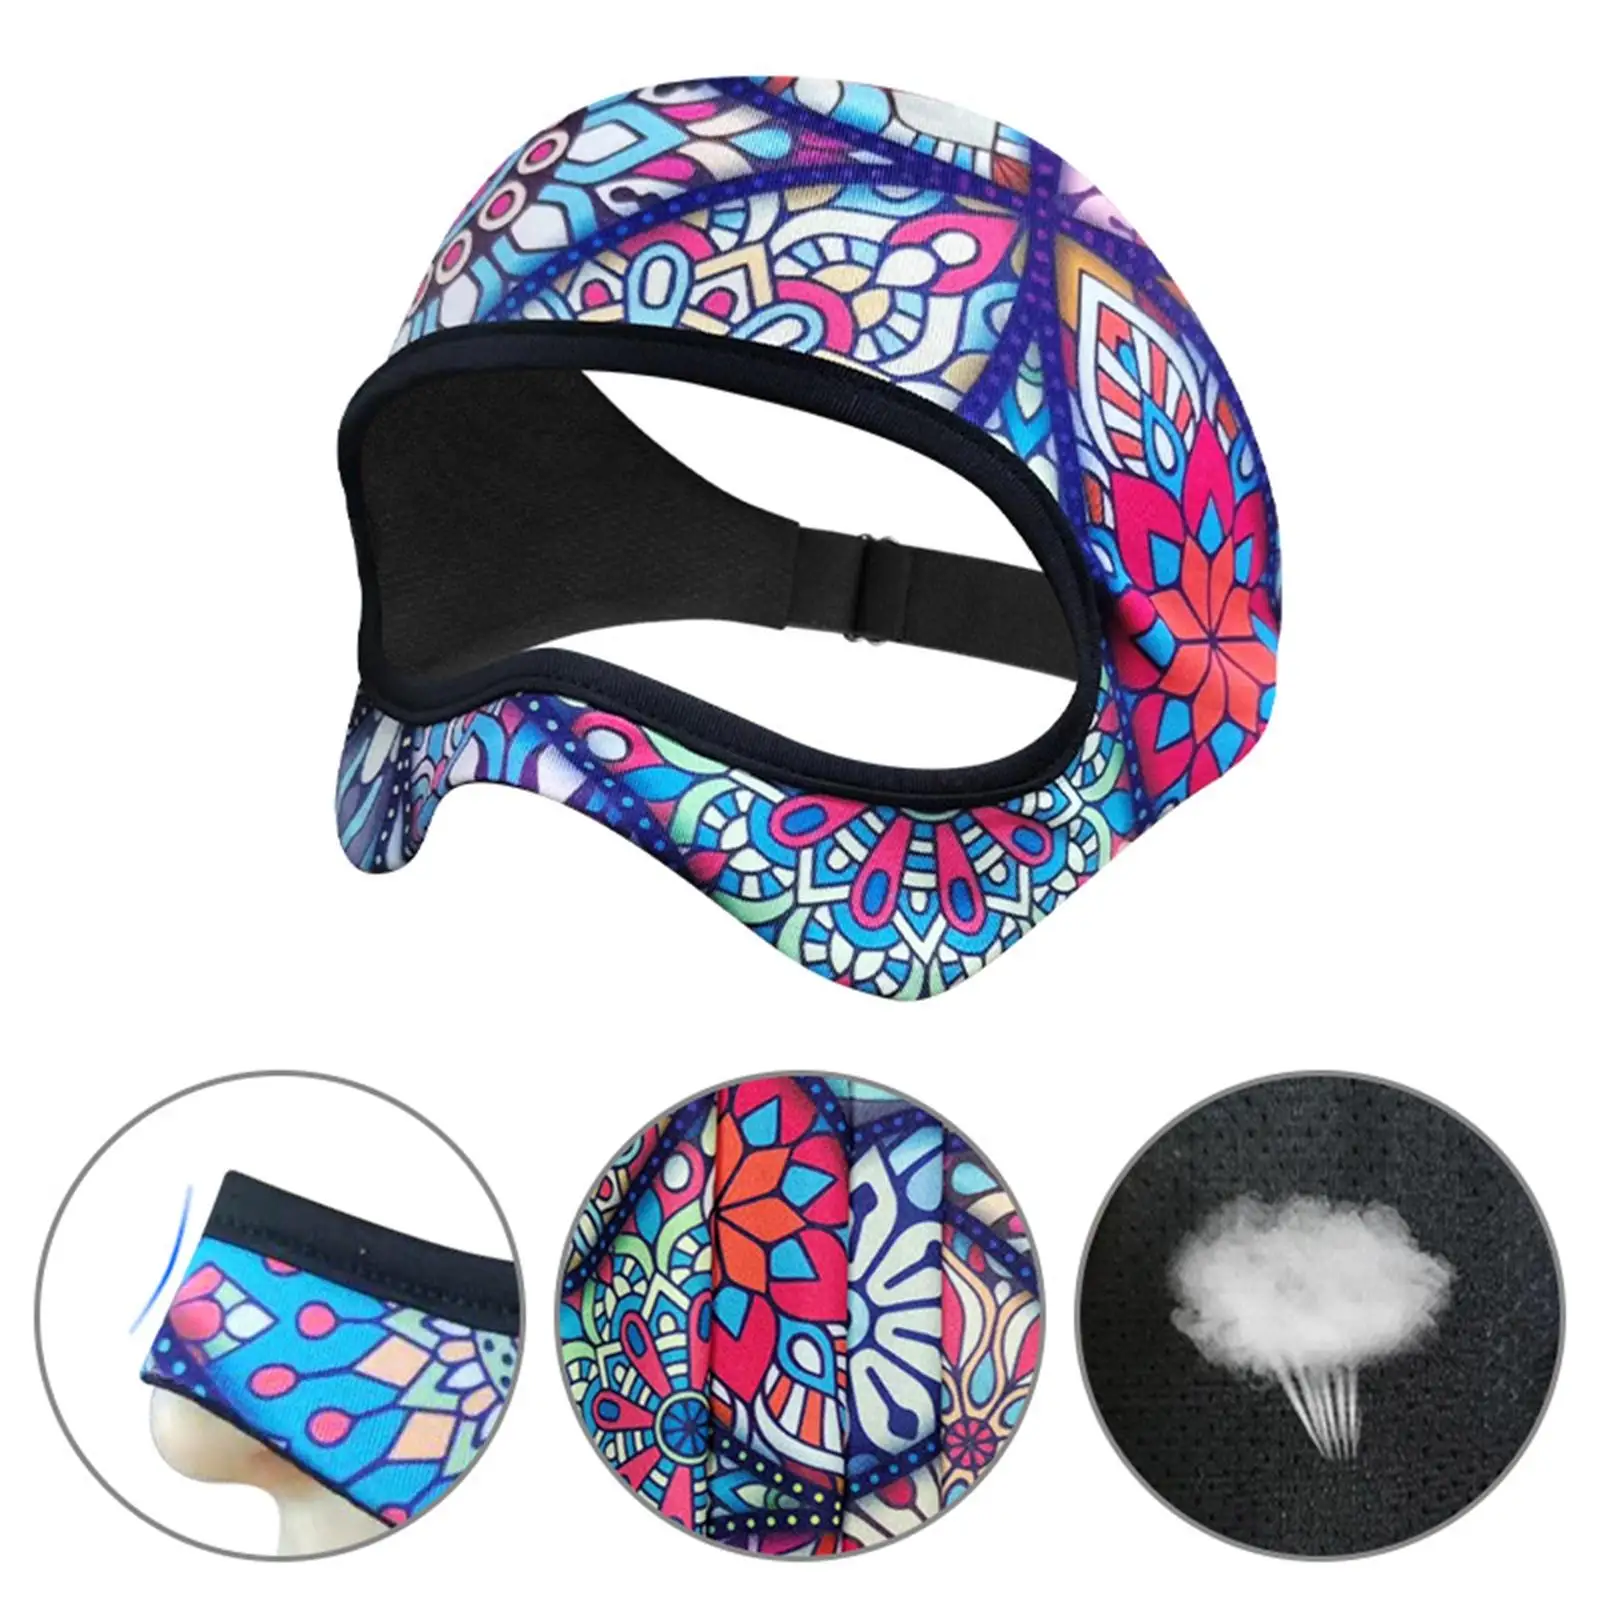 VR Accessories Eye Mask Cover Breathable Sweat Band Cover Adjustable Washable Face Cover for Games Accessories Home